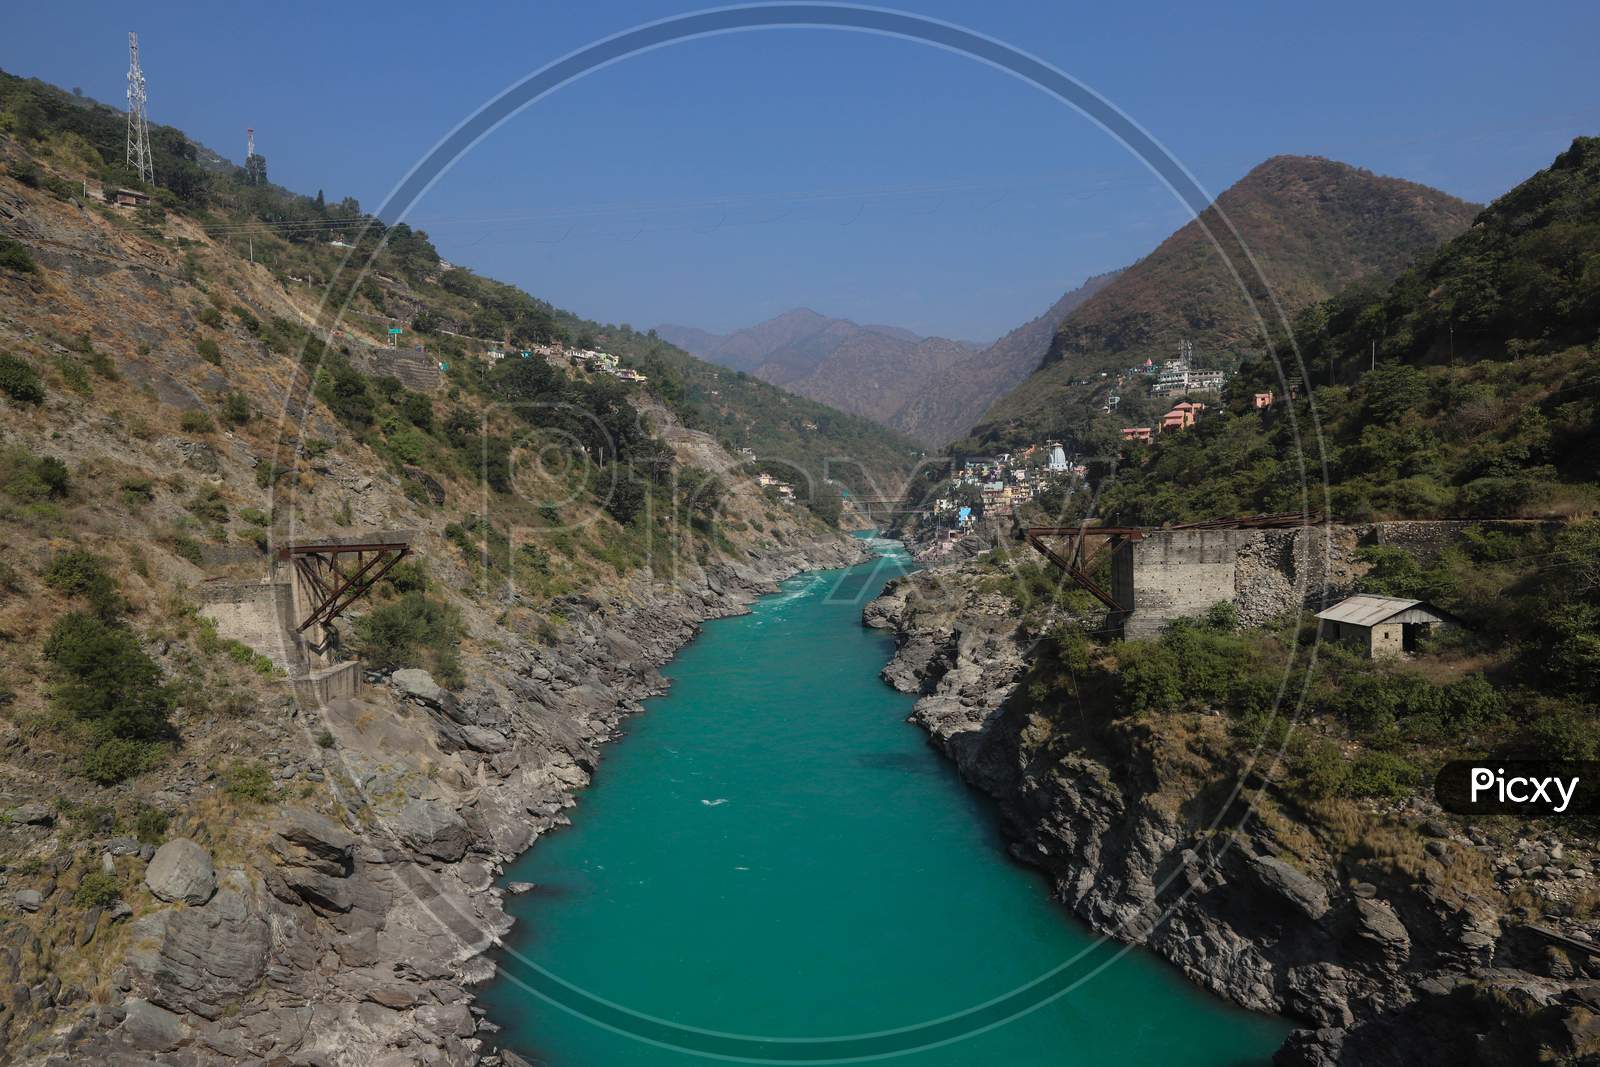 The confluence of Alaknanda and Bhagirathi rivers, which is officially accepted as the start of the River Ganges, in the town of Devprayag, Uttarakhand. For many Hindus, life is incomplete without bathing in it at least once in their lifetime, washing away their sins.